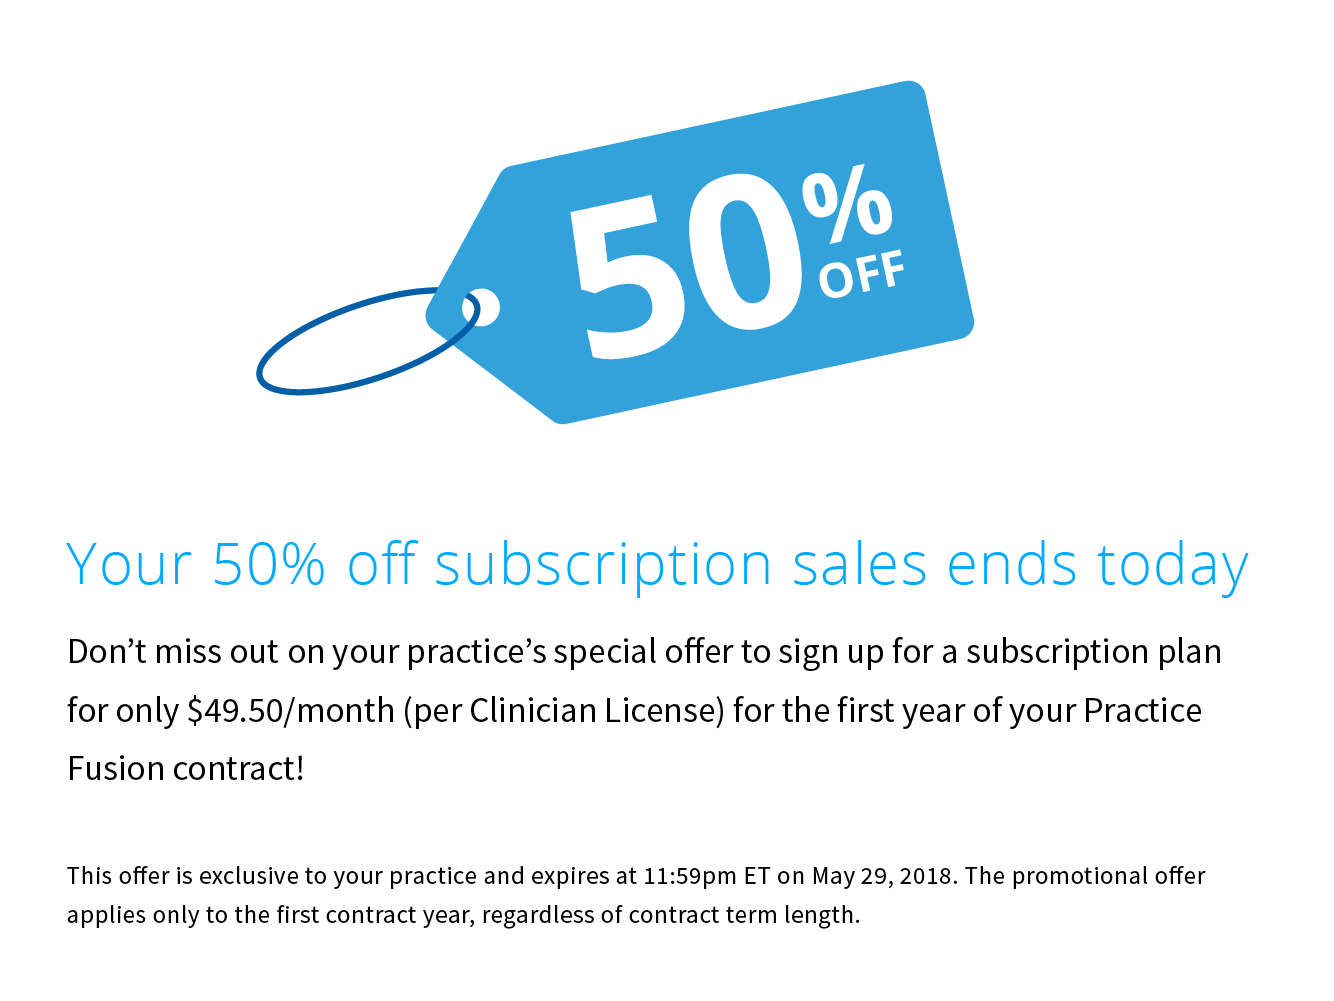 Don't miss out on your practice's special offer to sign up for a subscription plan for only $49.50/month (per Clinician License) for the first year of your Practice Fusion contract!